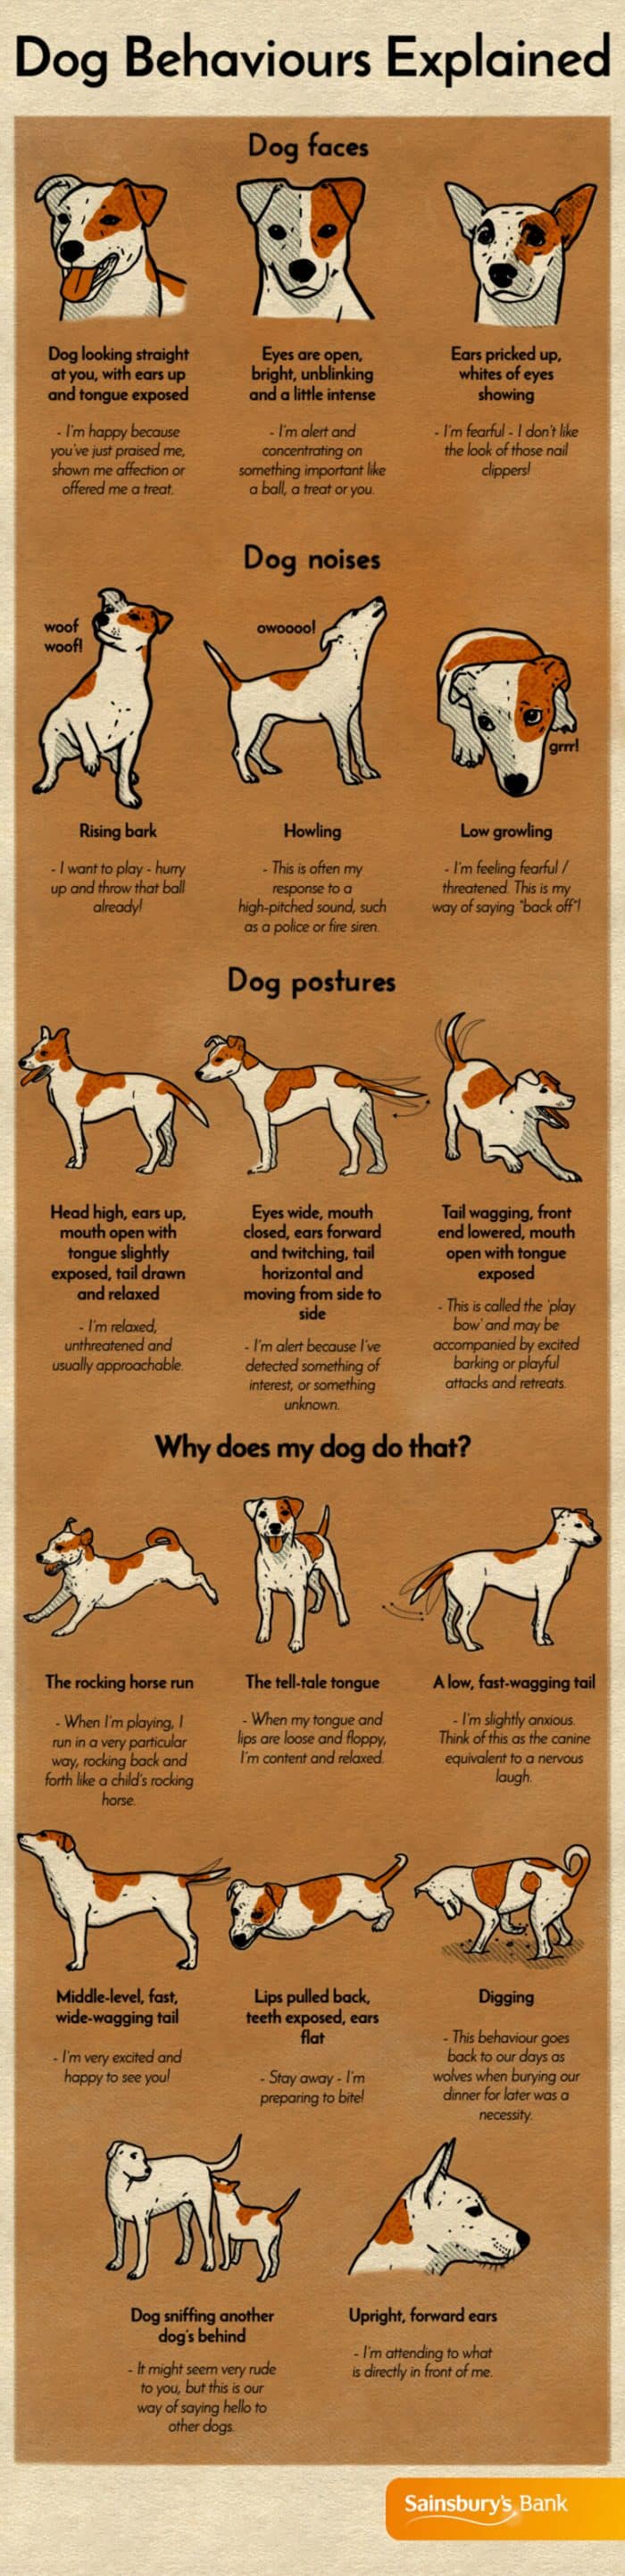 explanation of common dog behaviors including positions and sounds